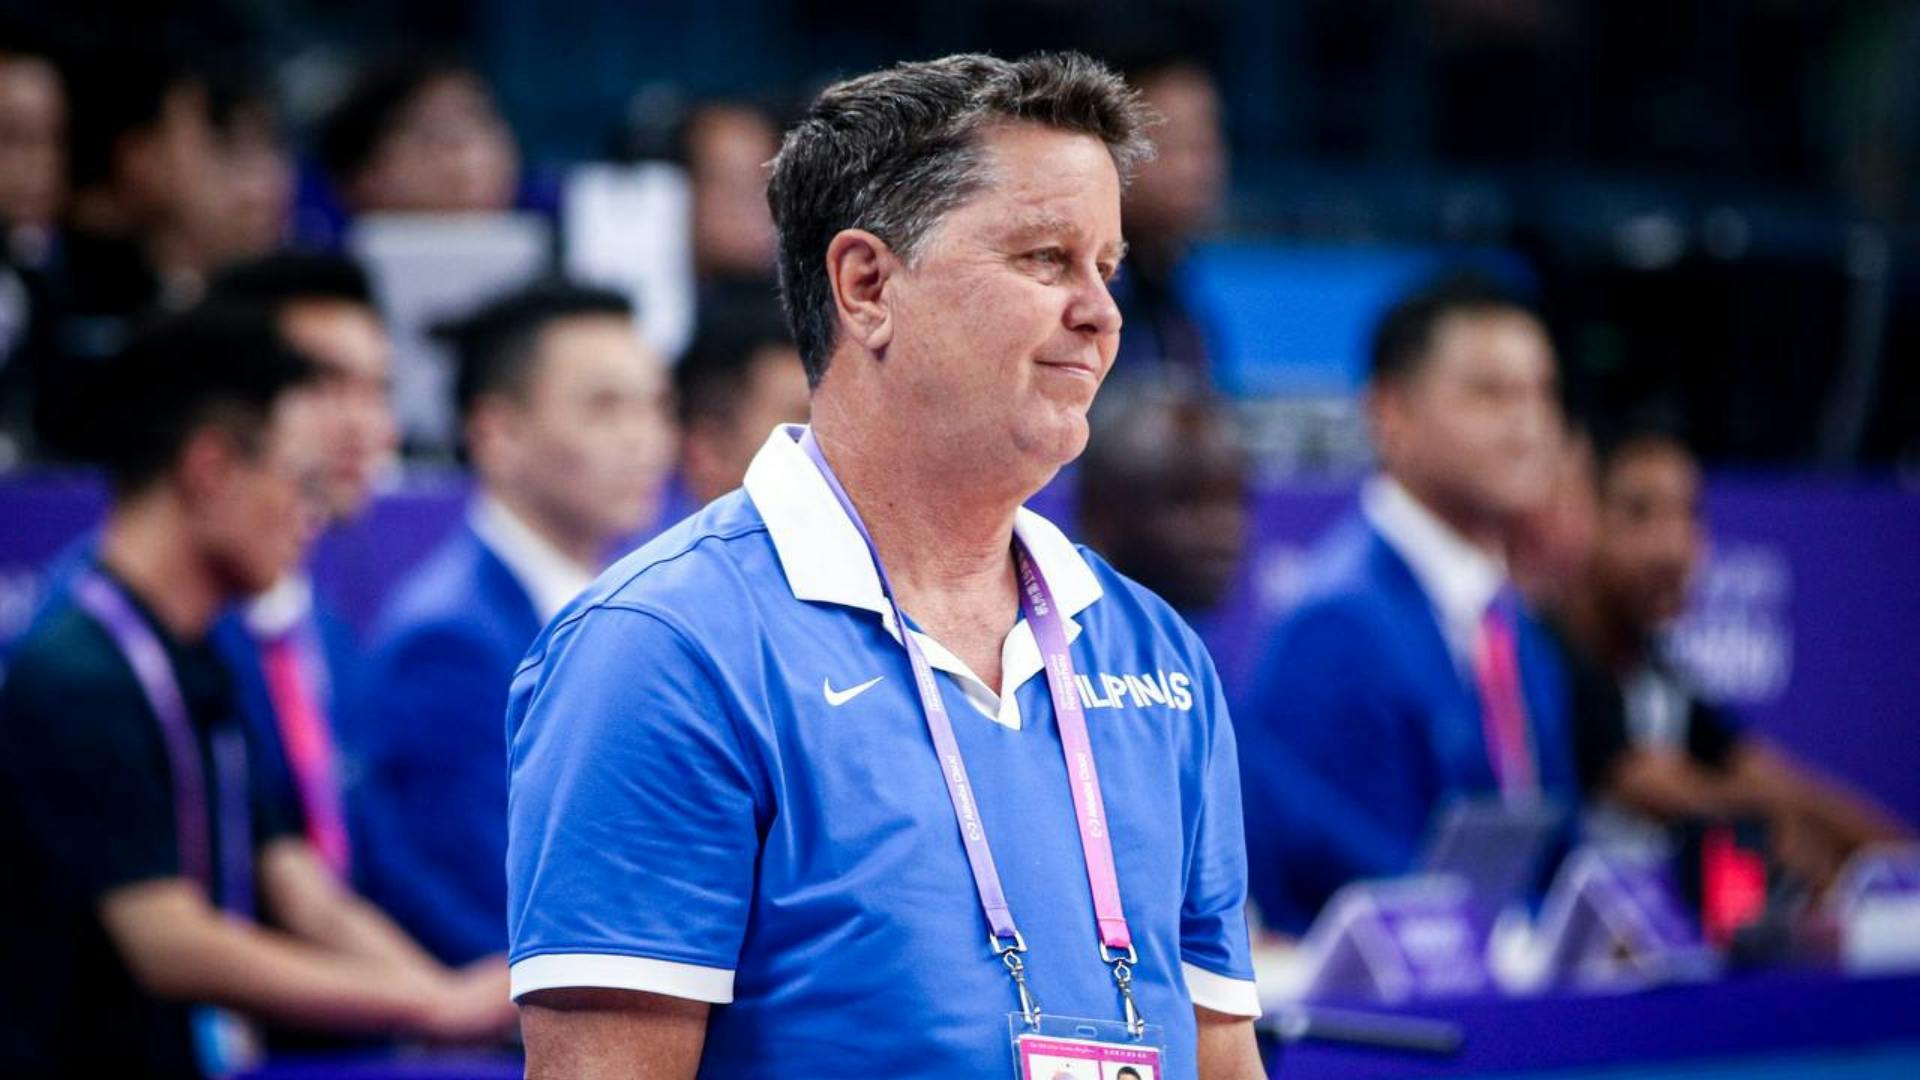 "Stars align" in having Tim Cone finally coach Gilas Pilipinas for real